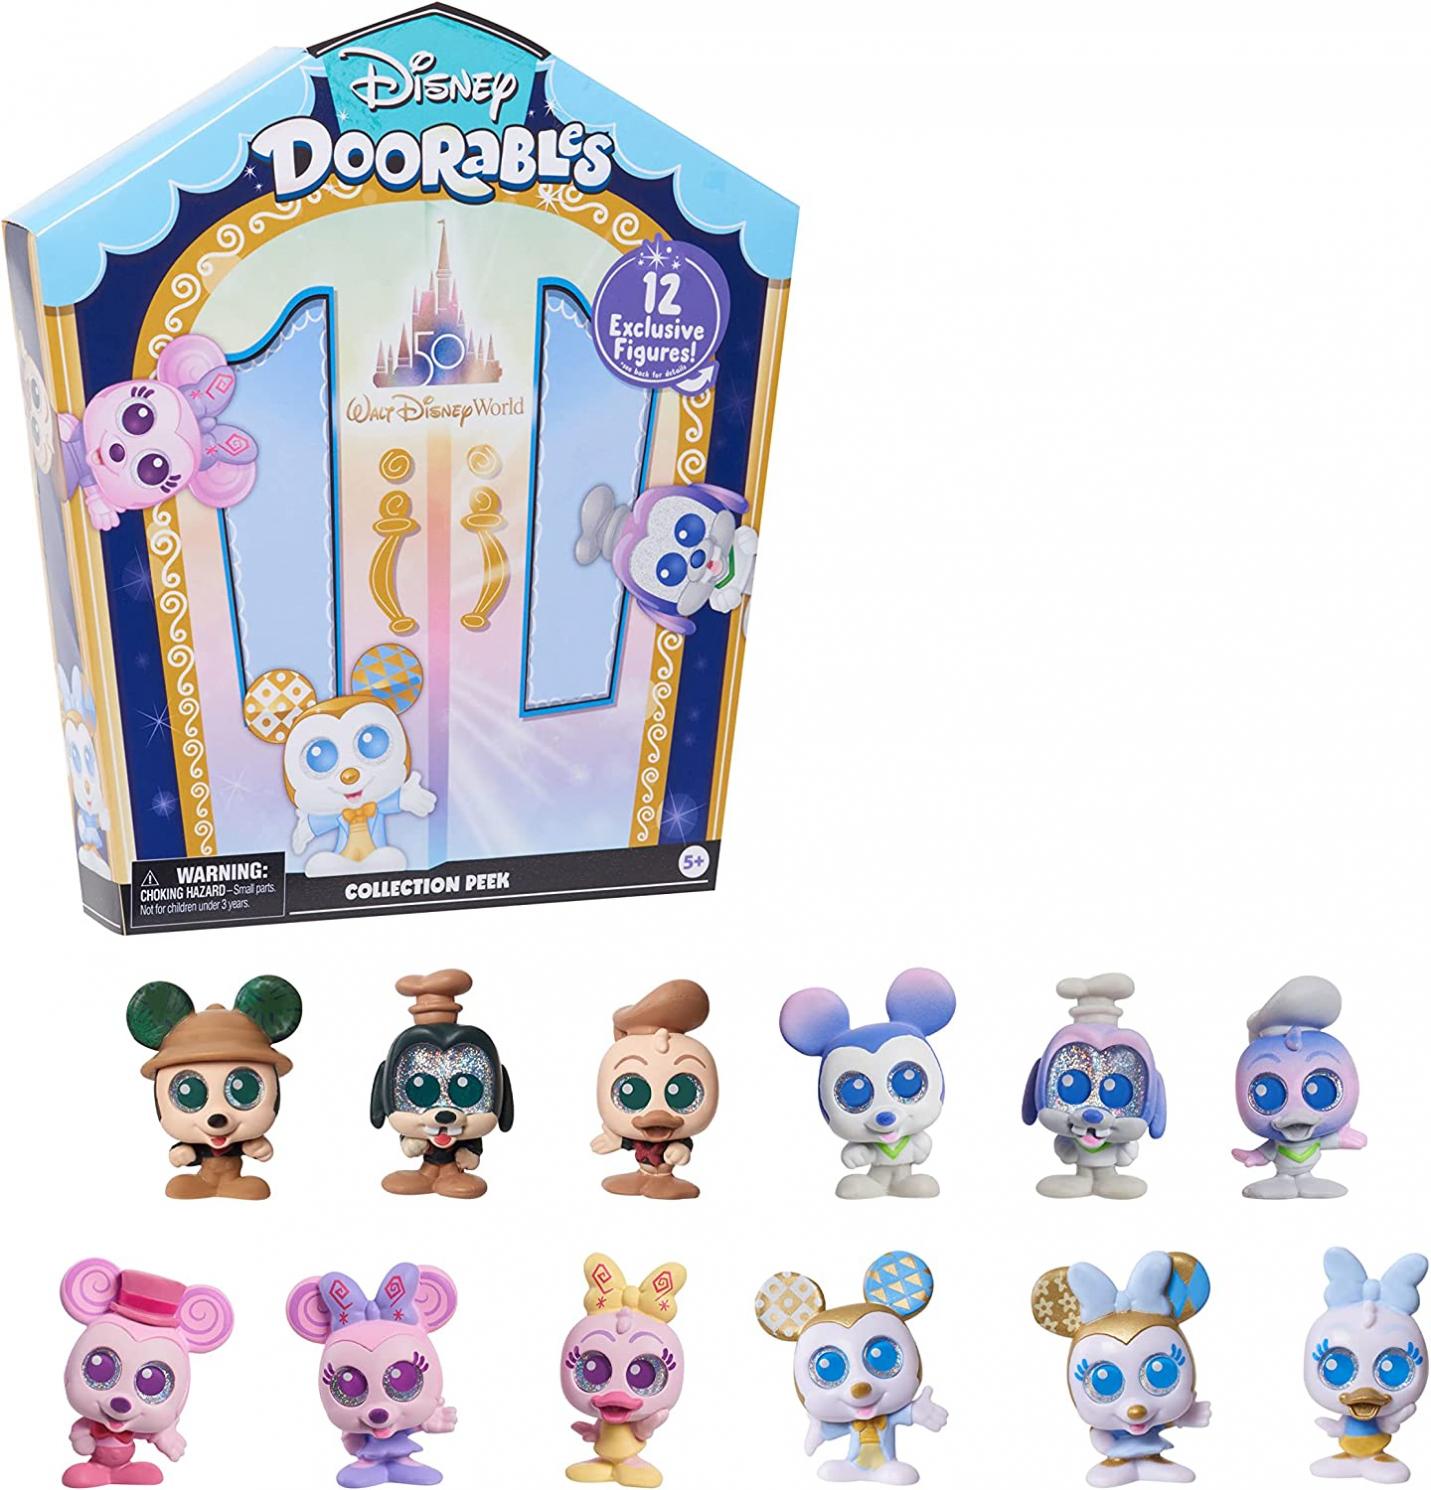 Doorables 50th Anniversary Collector Set, Officially Licensed Kids Toys for Ages 3 Up, Gifts and Presents, Amazon Exclusive